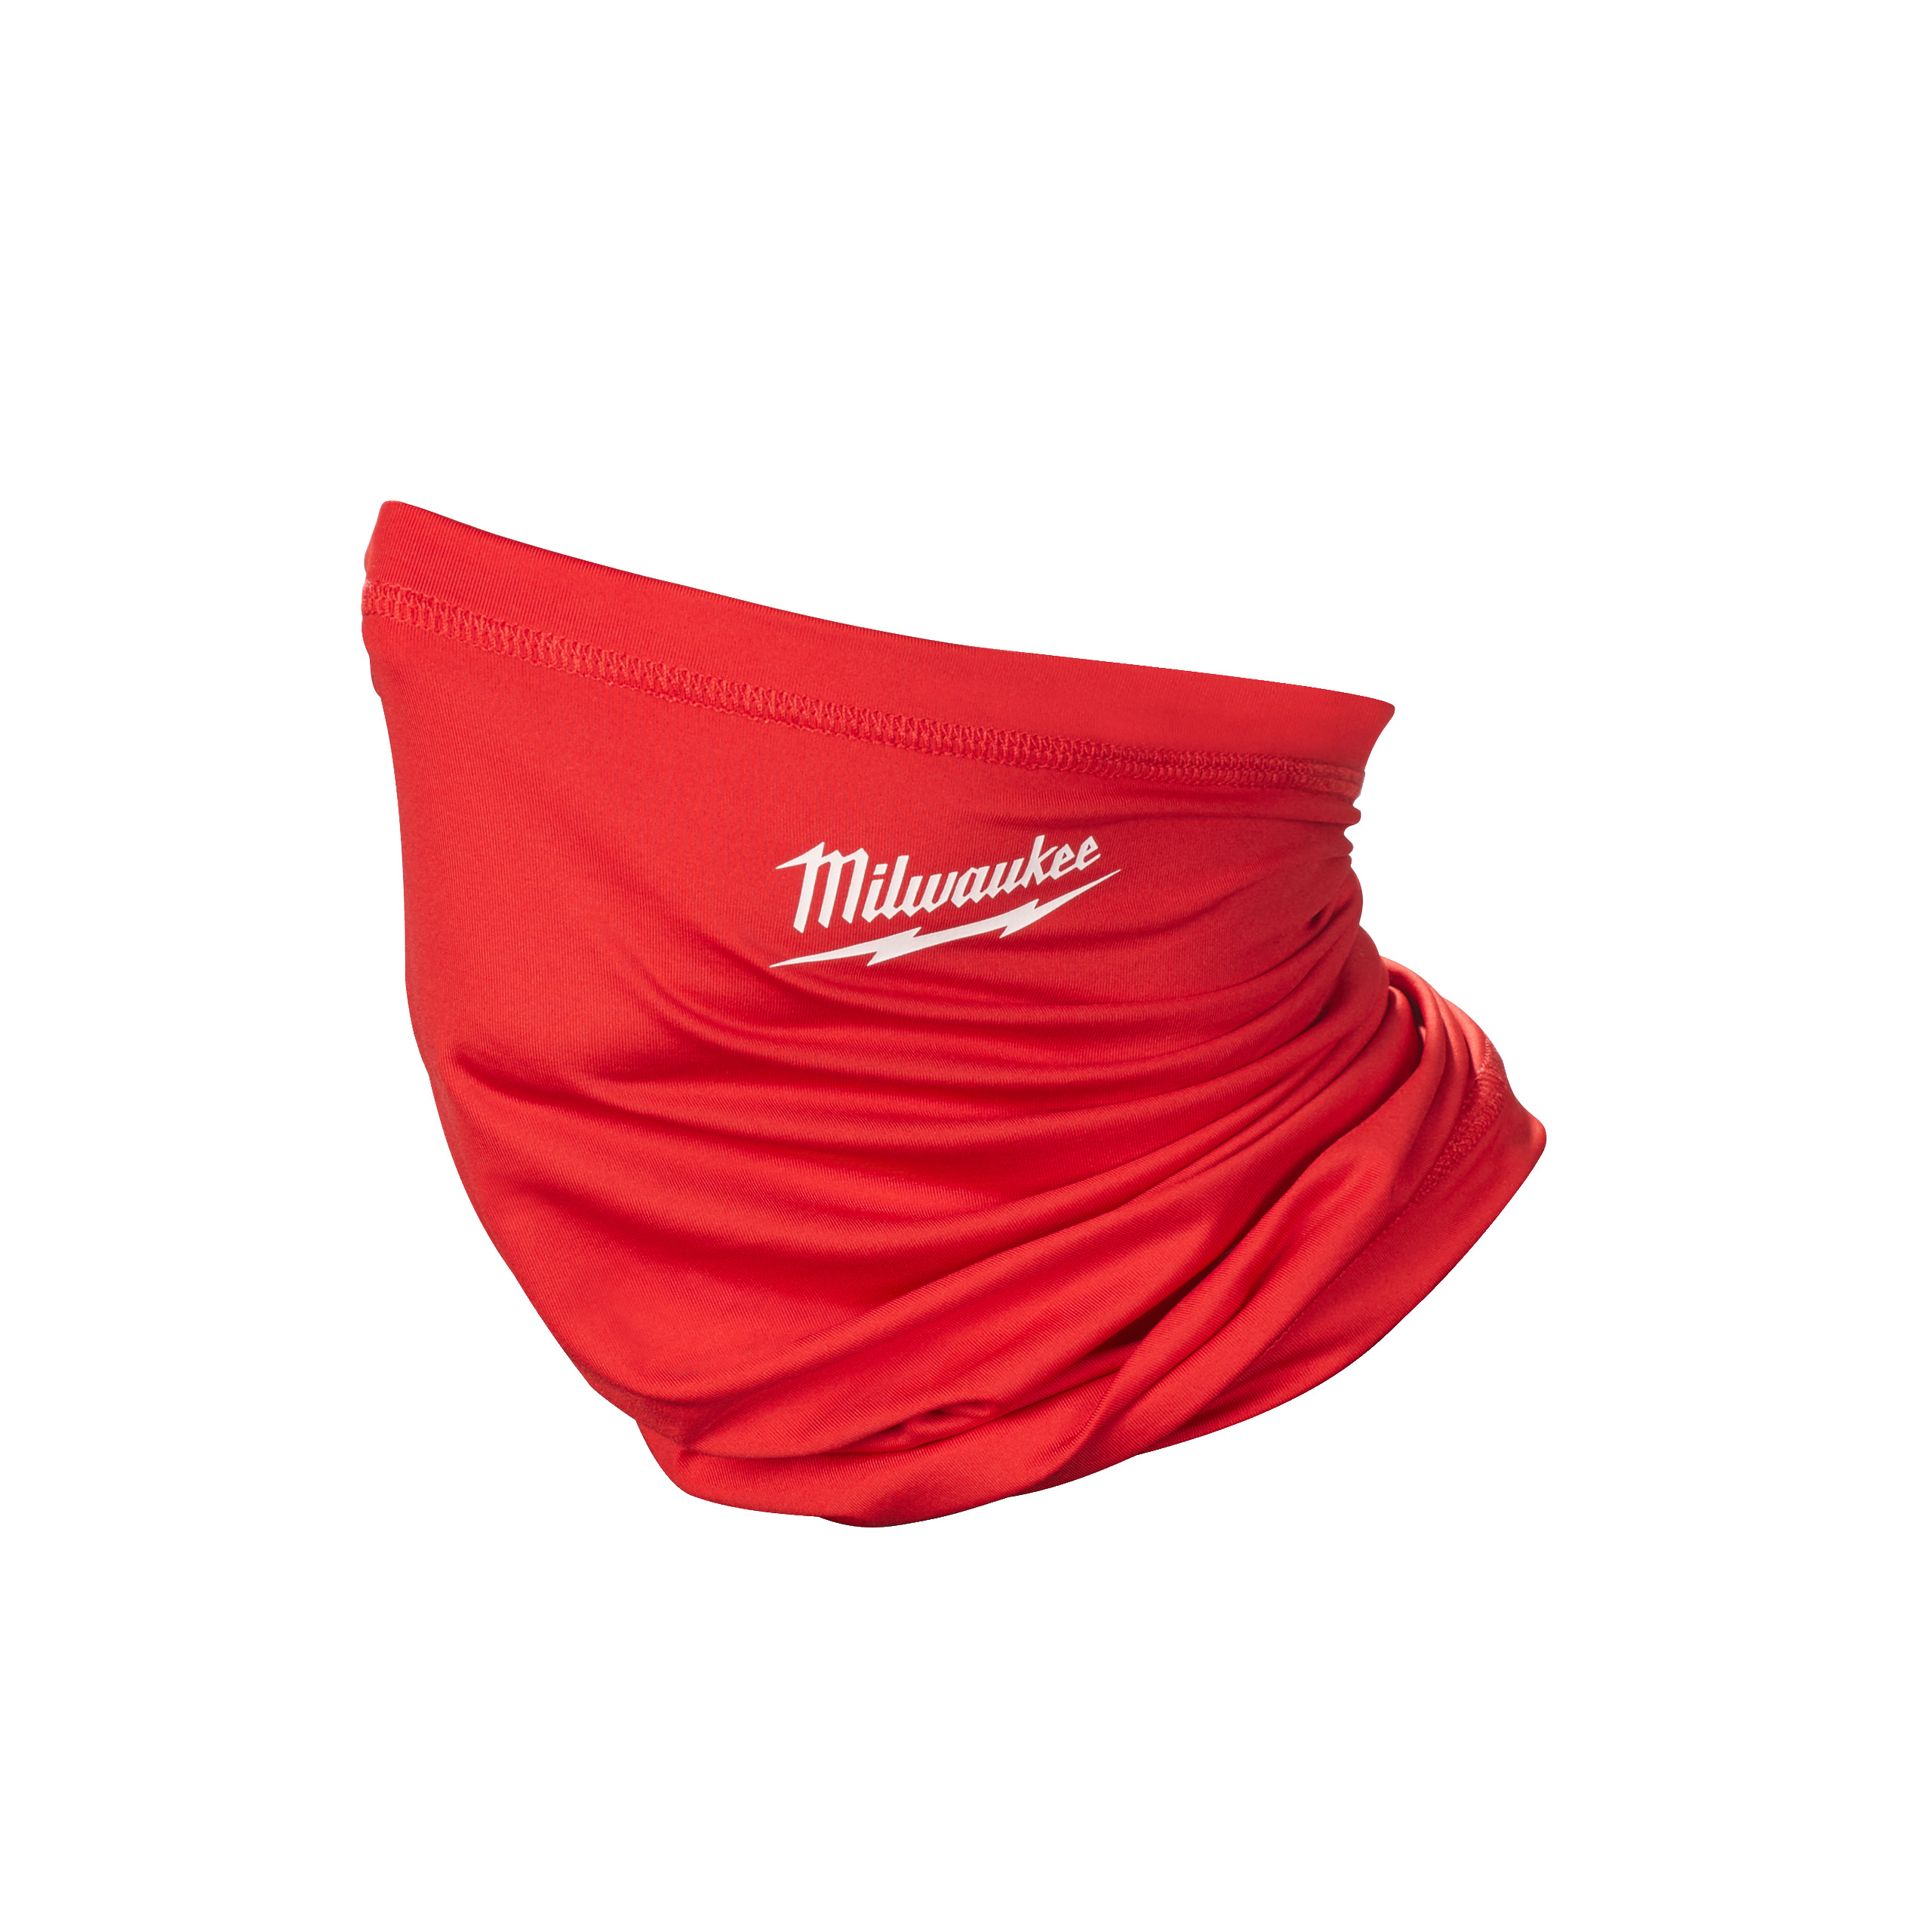 NGFM-R NECK GAITER + FACE MASK RED XXX